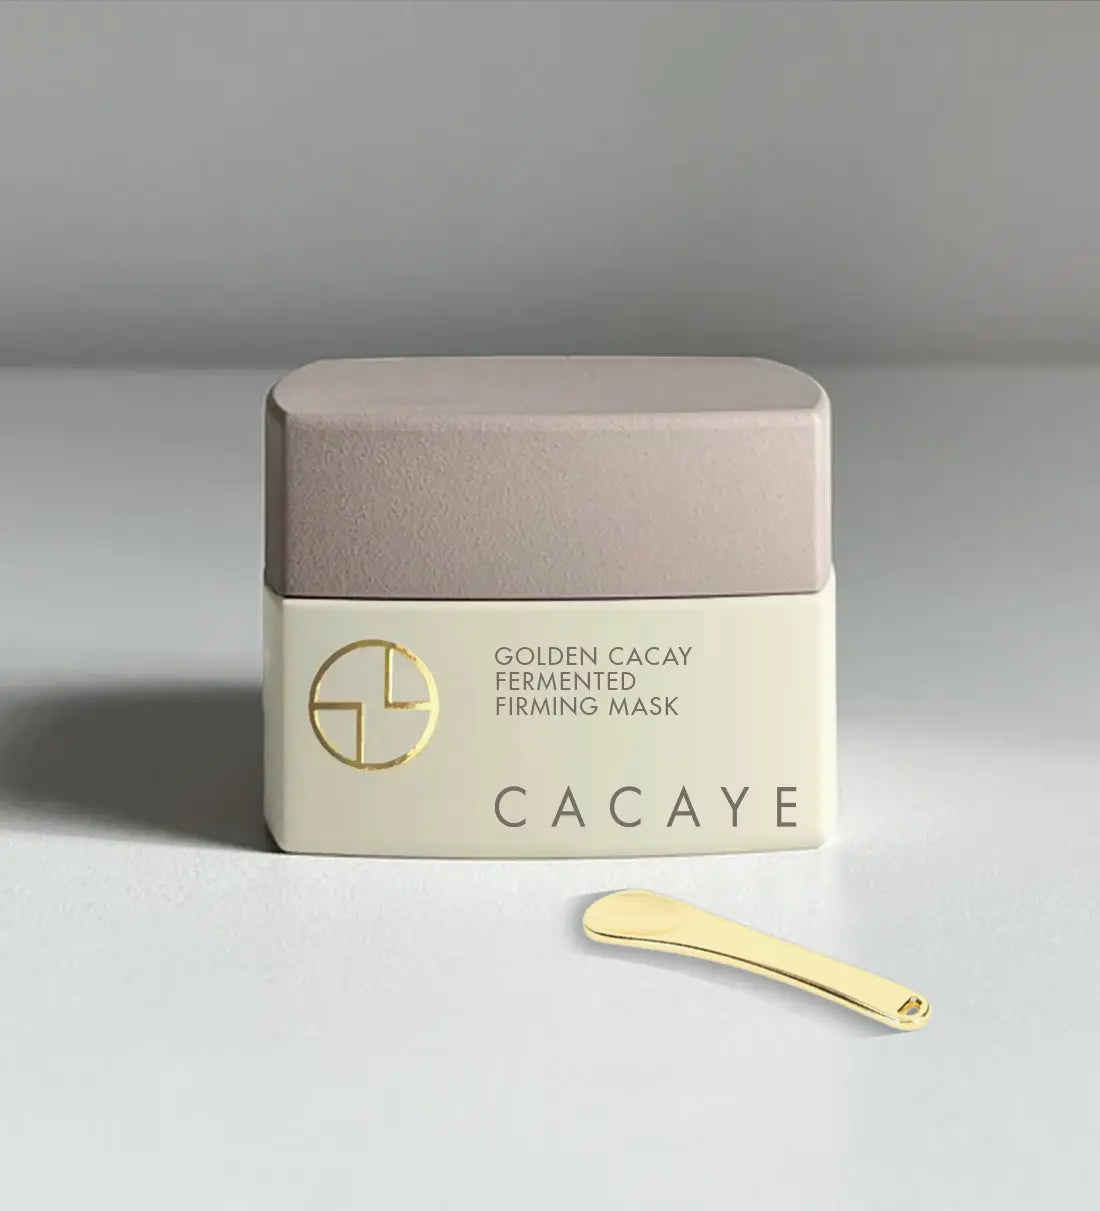 CACAYE GOLDEN CACAY FERMENTED FIRMING MASK JAR WITH SPATULA